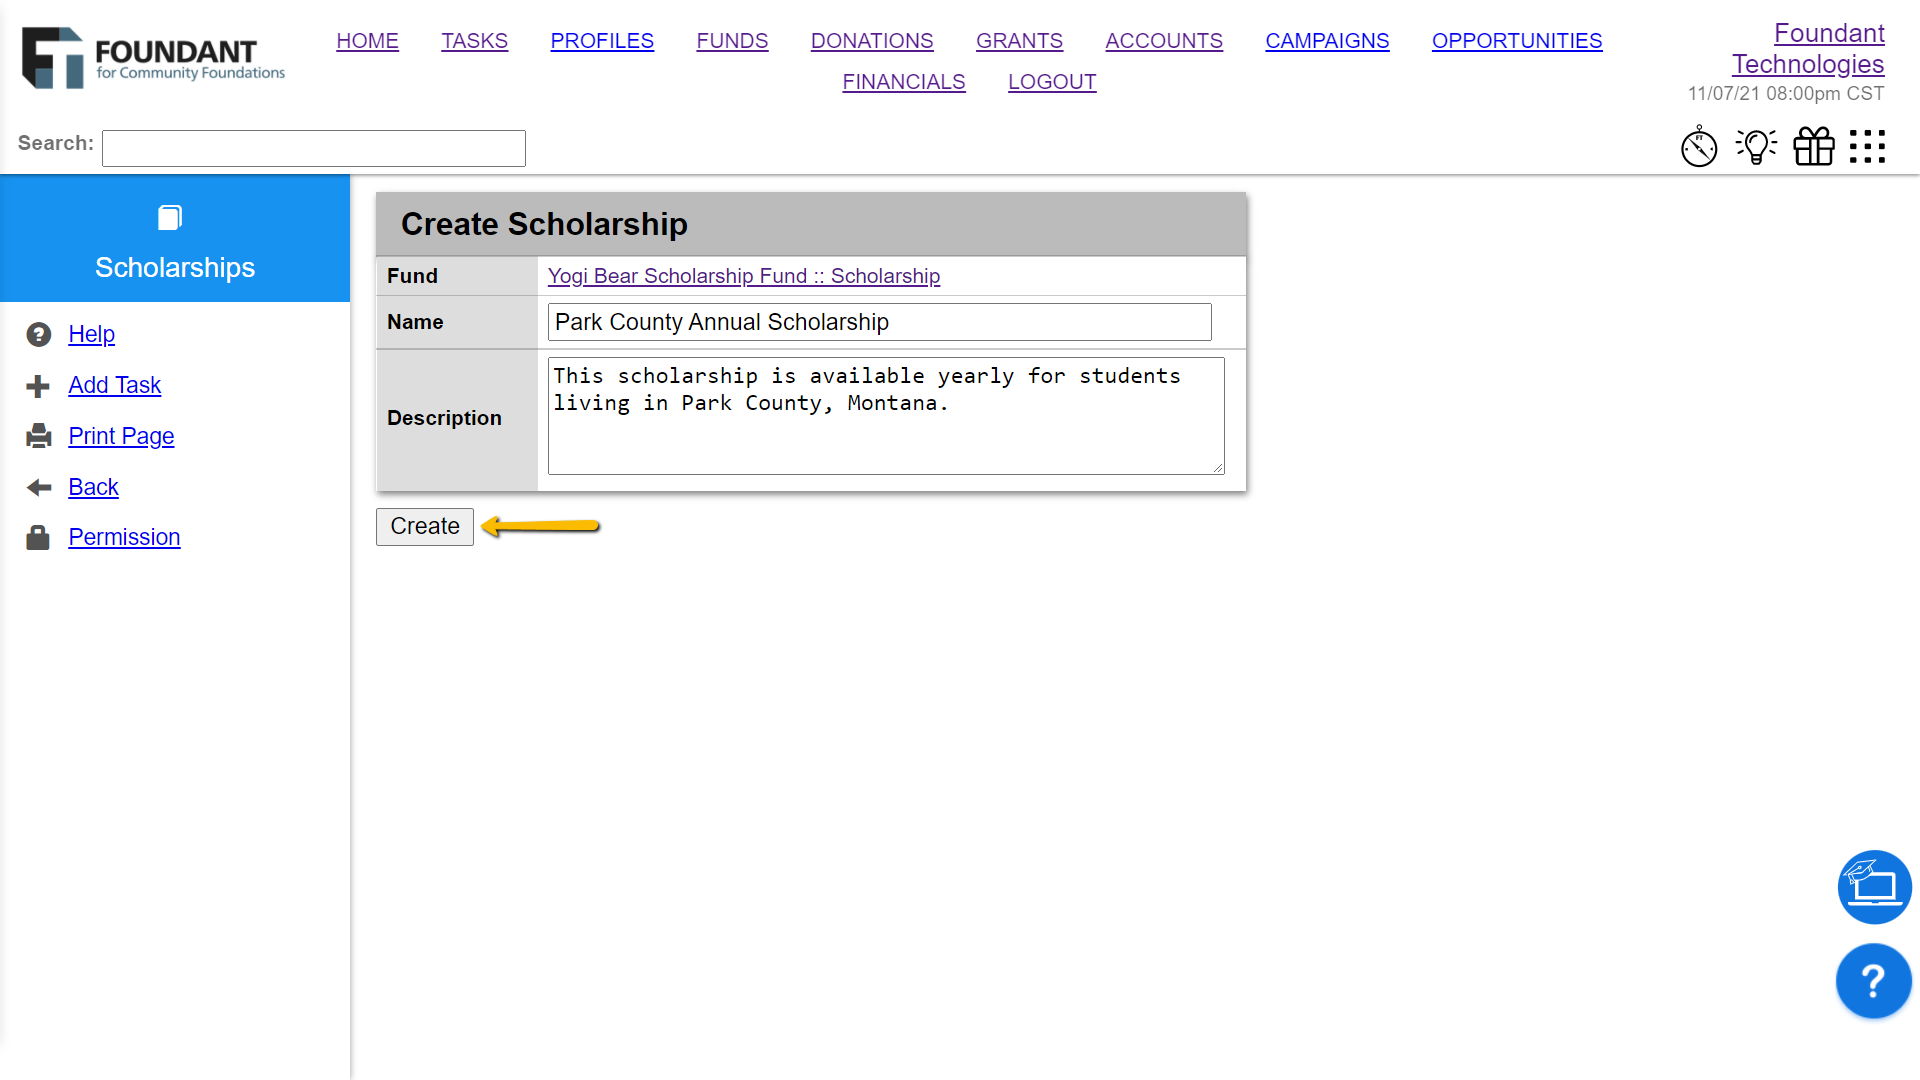 Scholarship_Opportunity_4.png